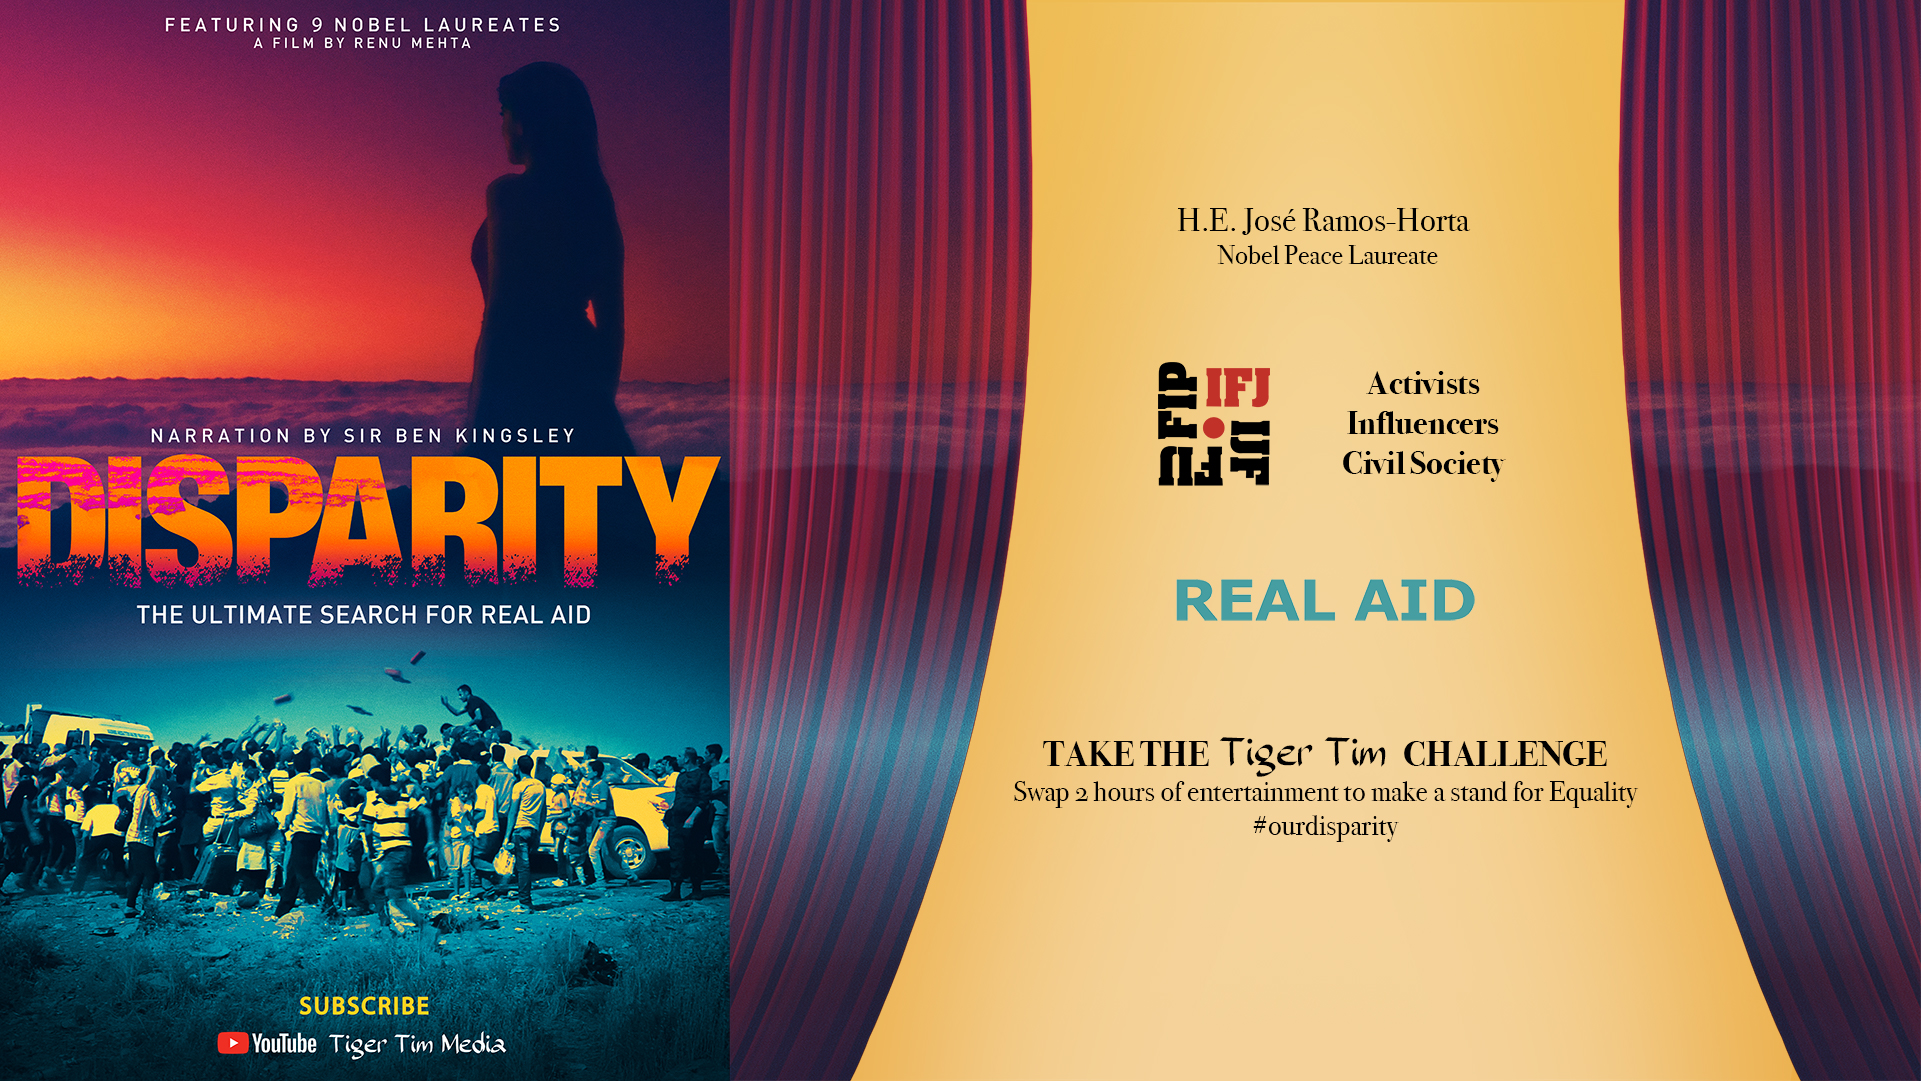 Disparity film poster, real aid charity and tiger tim challenge invitation